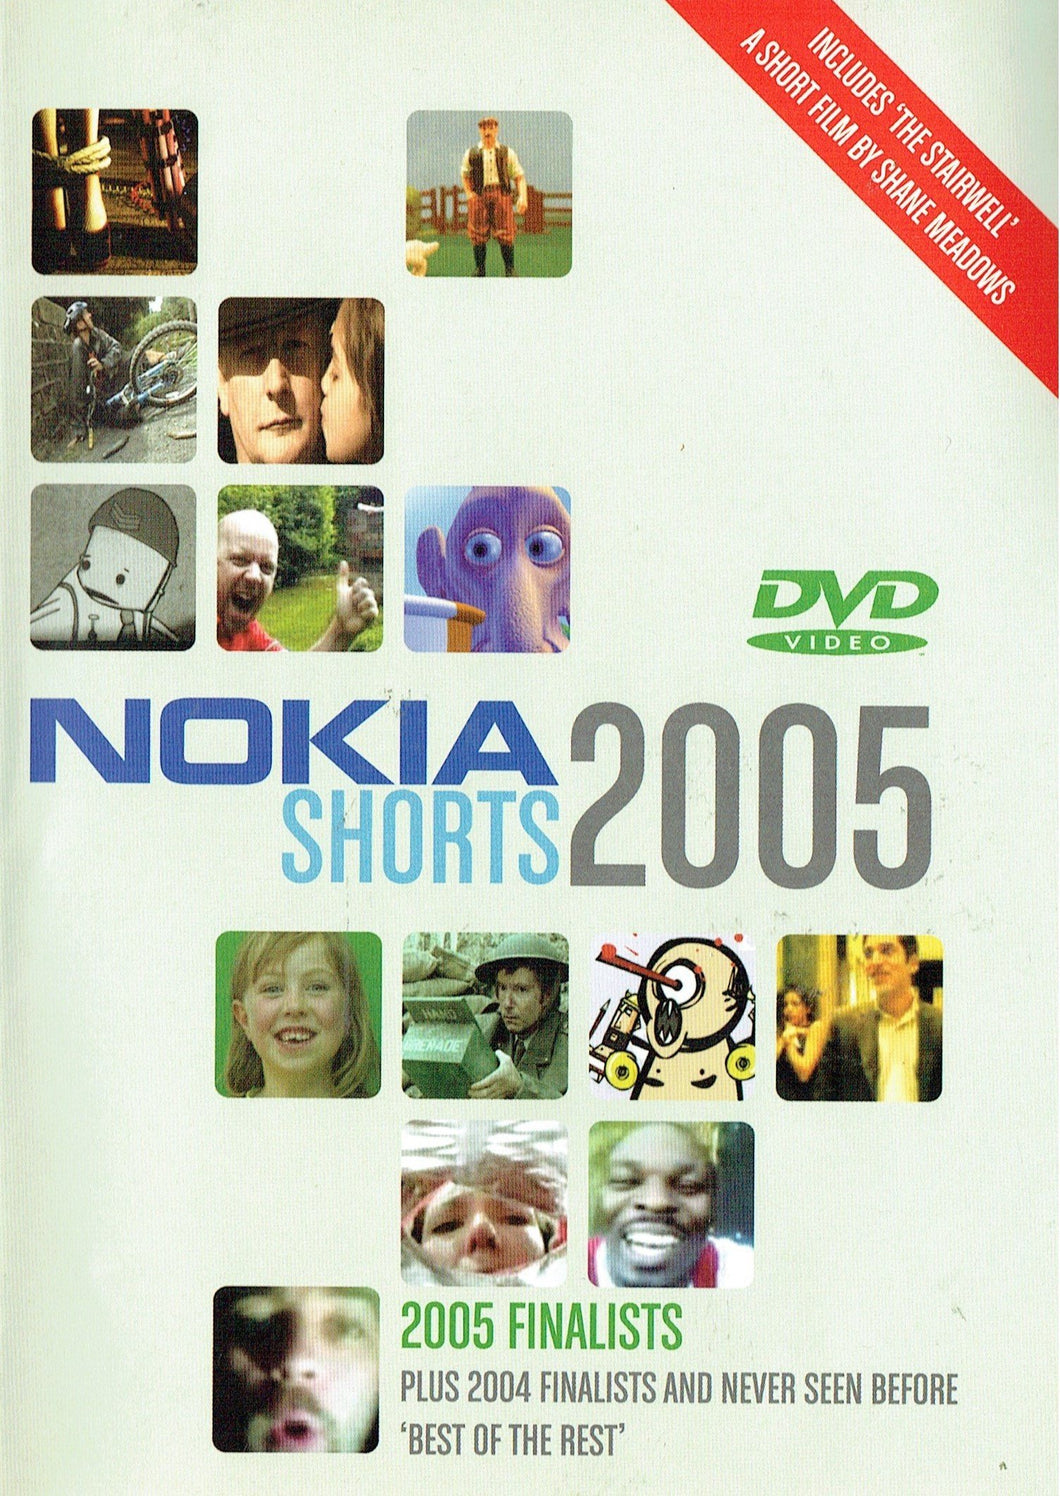 Nokia Shorts 2005: 2005 Finalists plus 2004 Finalists and Never Seen Before 'Best of the Rest' - Includes 'The Stairwell', a Short Film by Shane Meadows